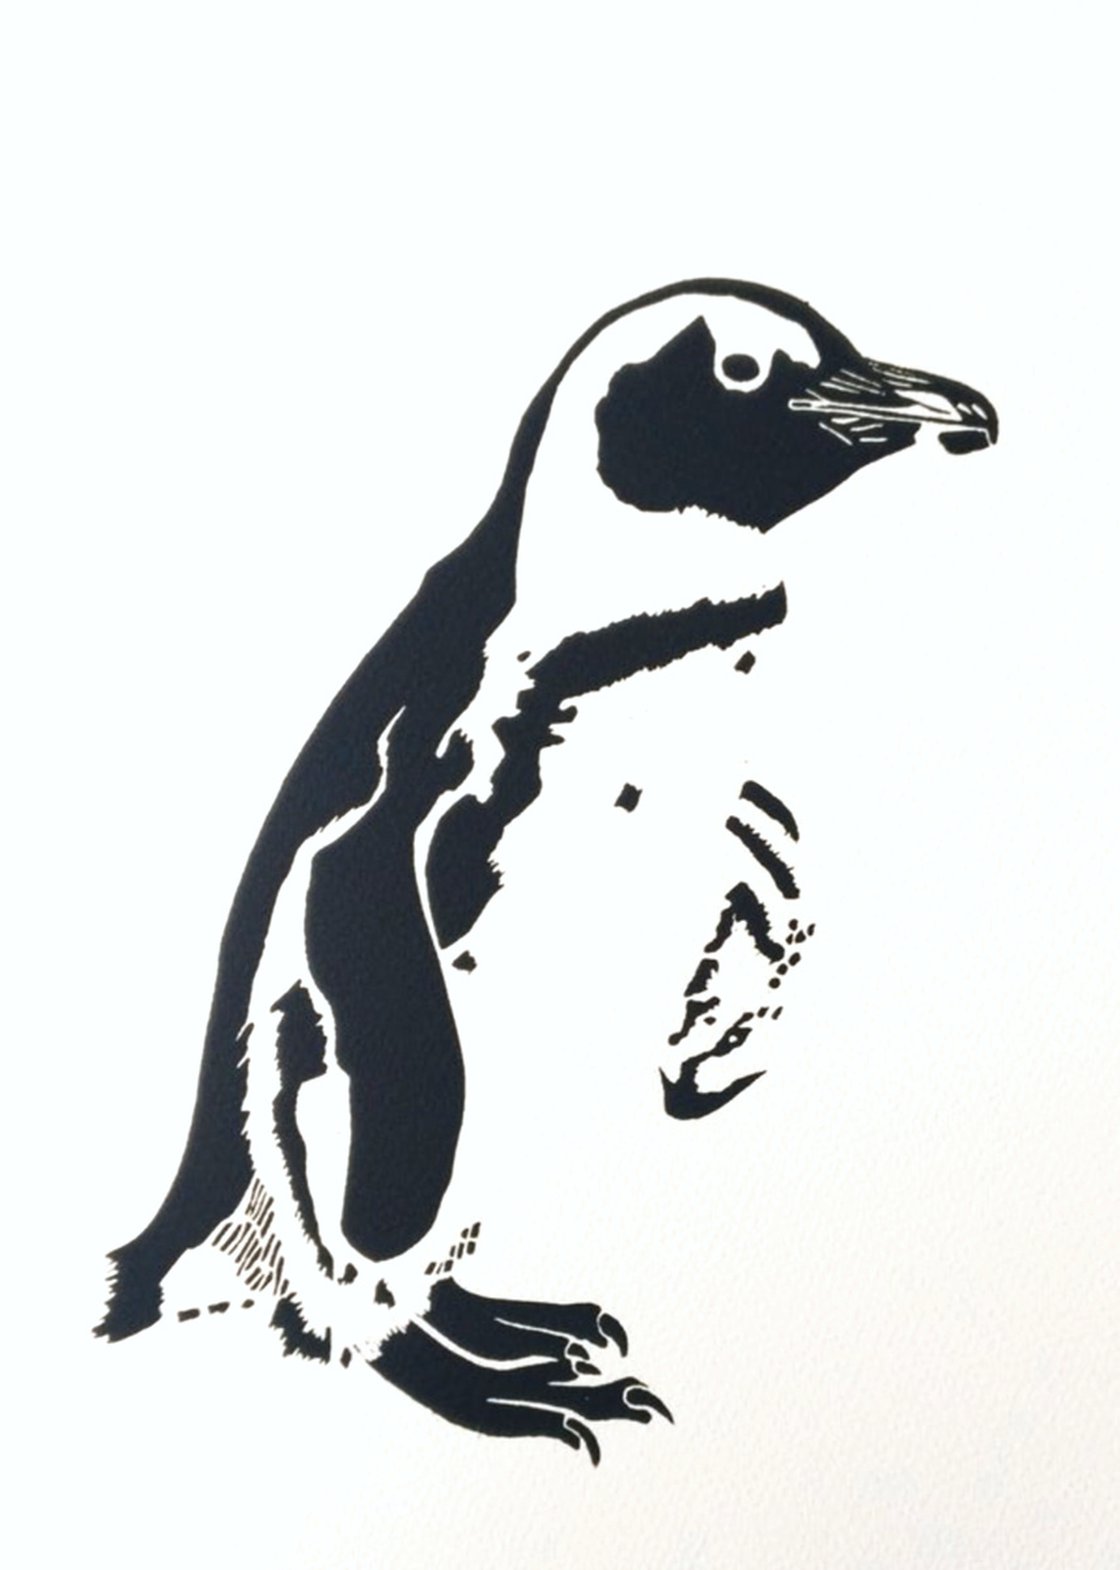 Handmade Limited Edition Puffin and Pelican Linocut Print Penguin